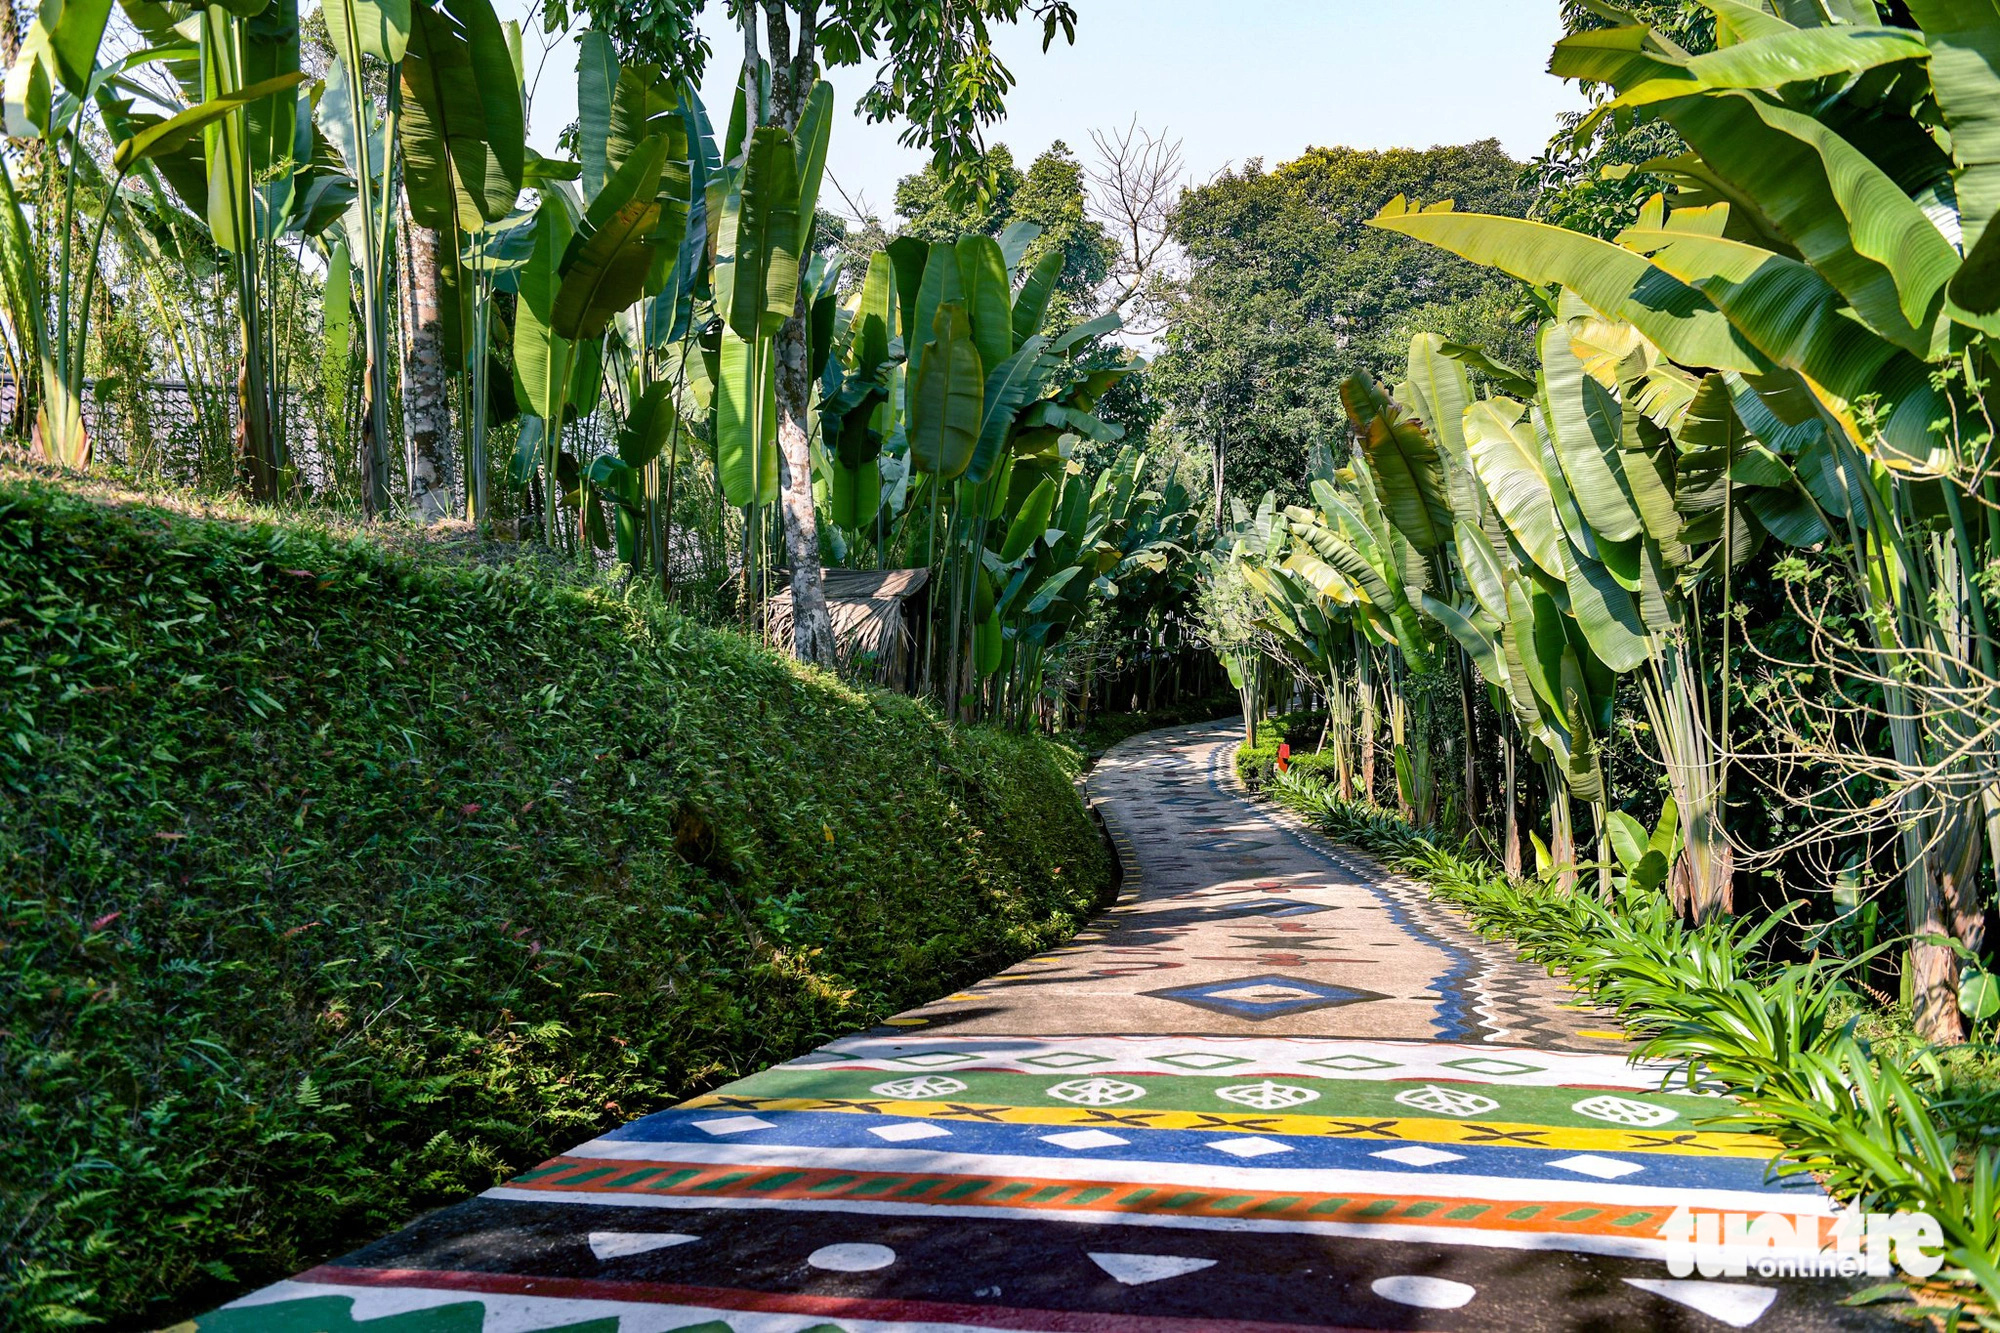 A painted road in the resort where an American billionaire couple vacationed in Ha Giang Province, northern Vietnam. Photo: Nam Tran / Tuoi Tre